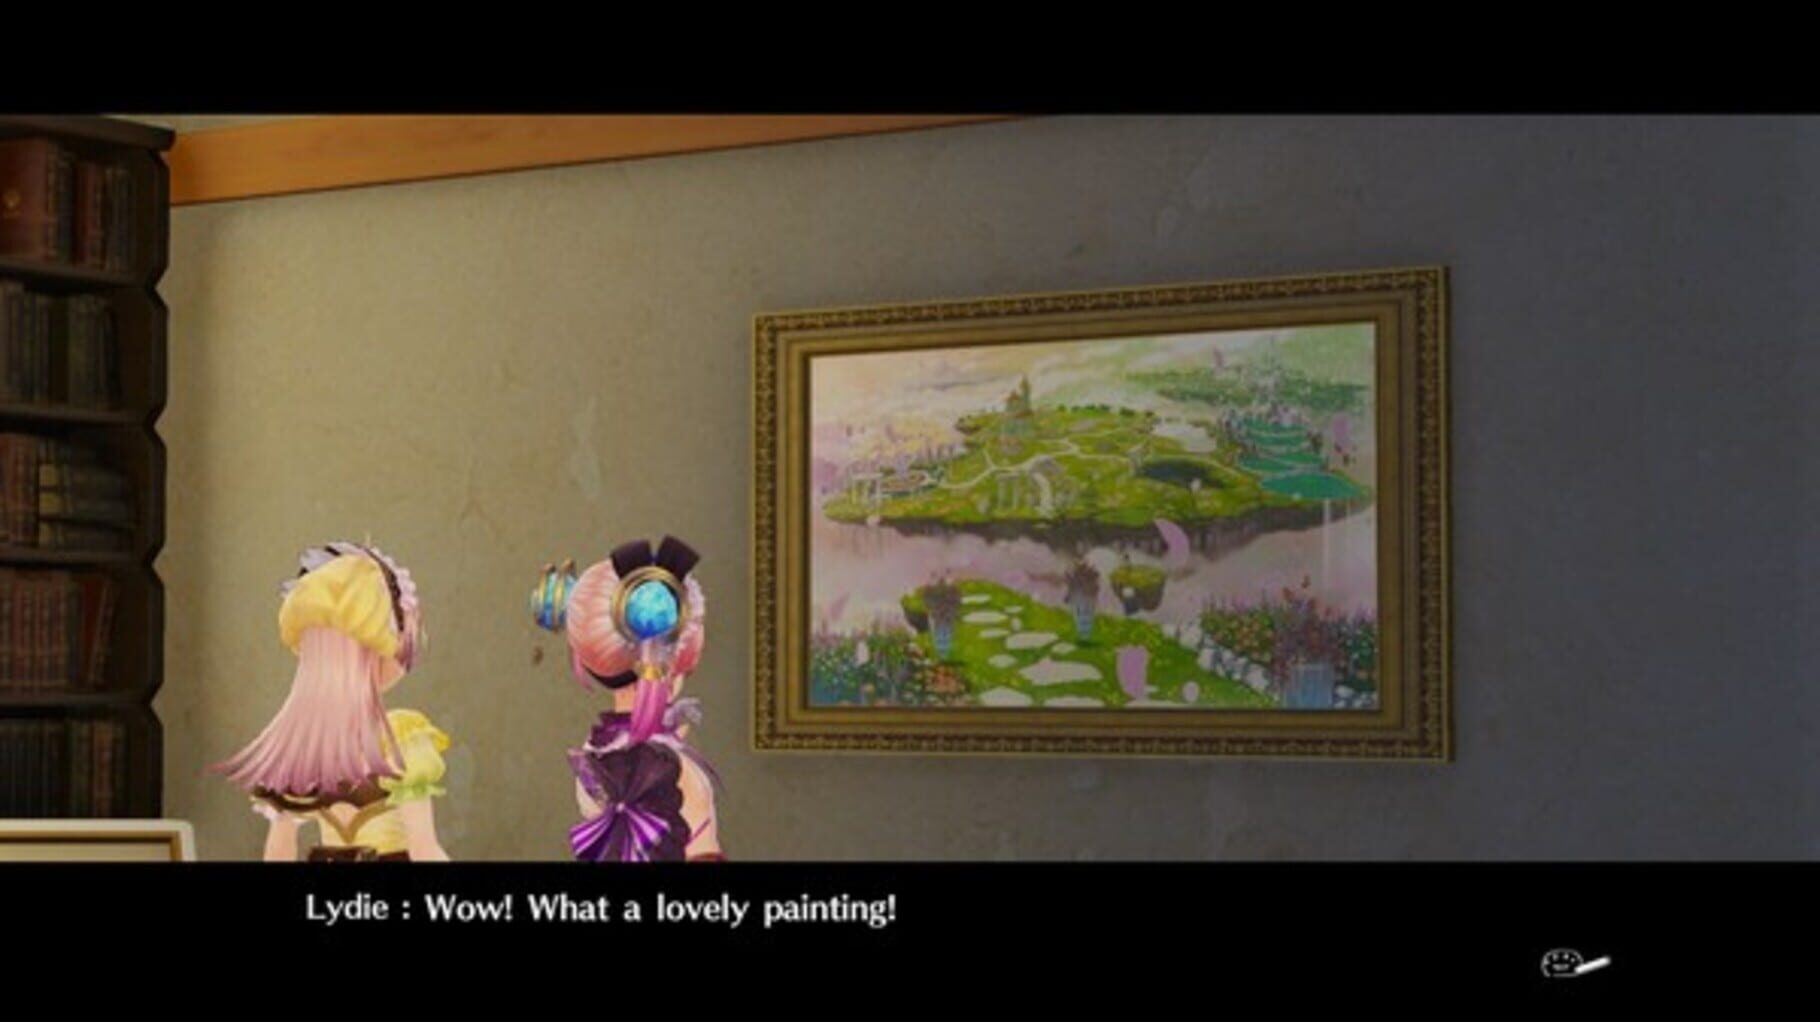 Atelier Lydie & Suelle: The Alchemists and the Mysterious Paintings screenshot